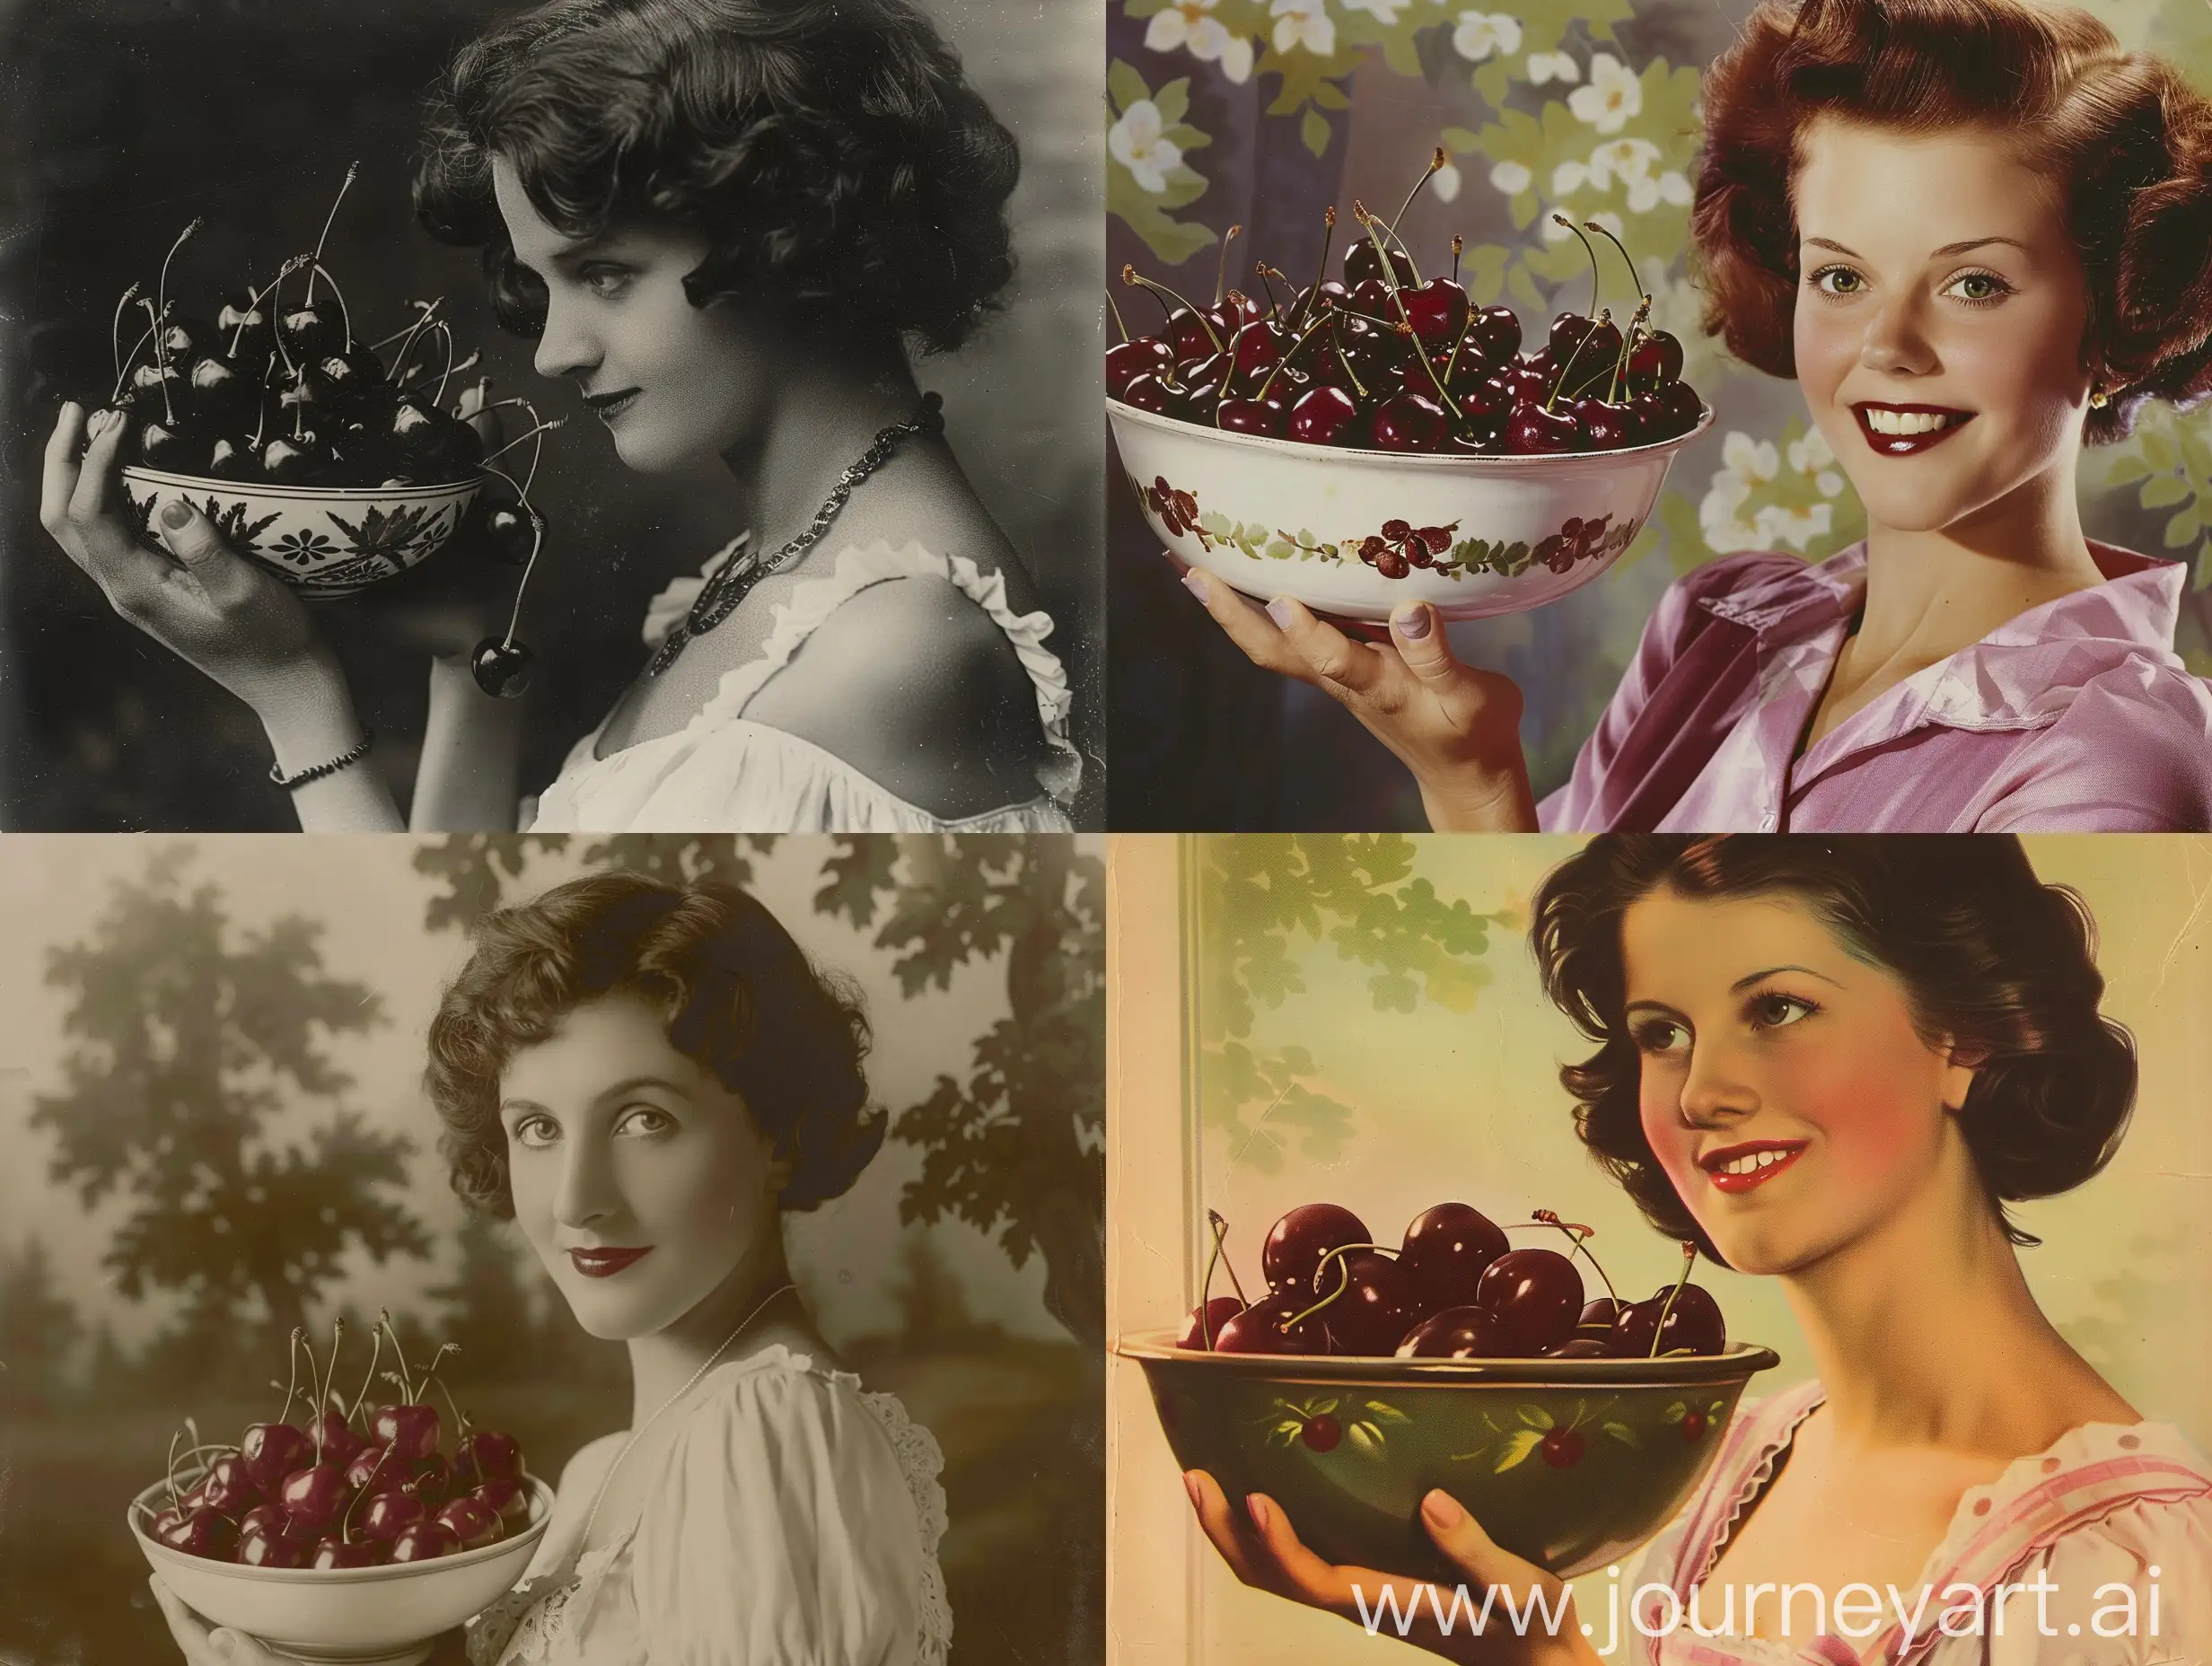 Real advertising photo of a lady holding a bowl of cherries